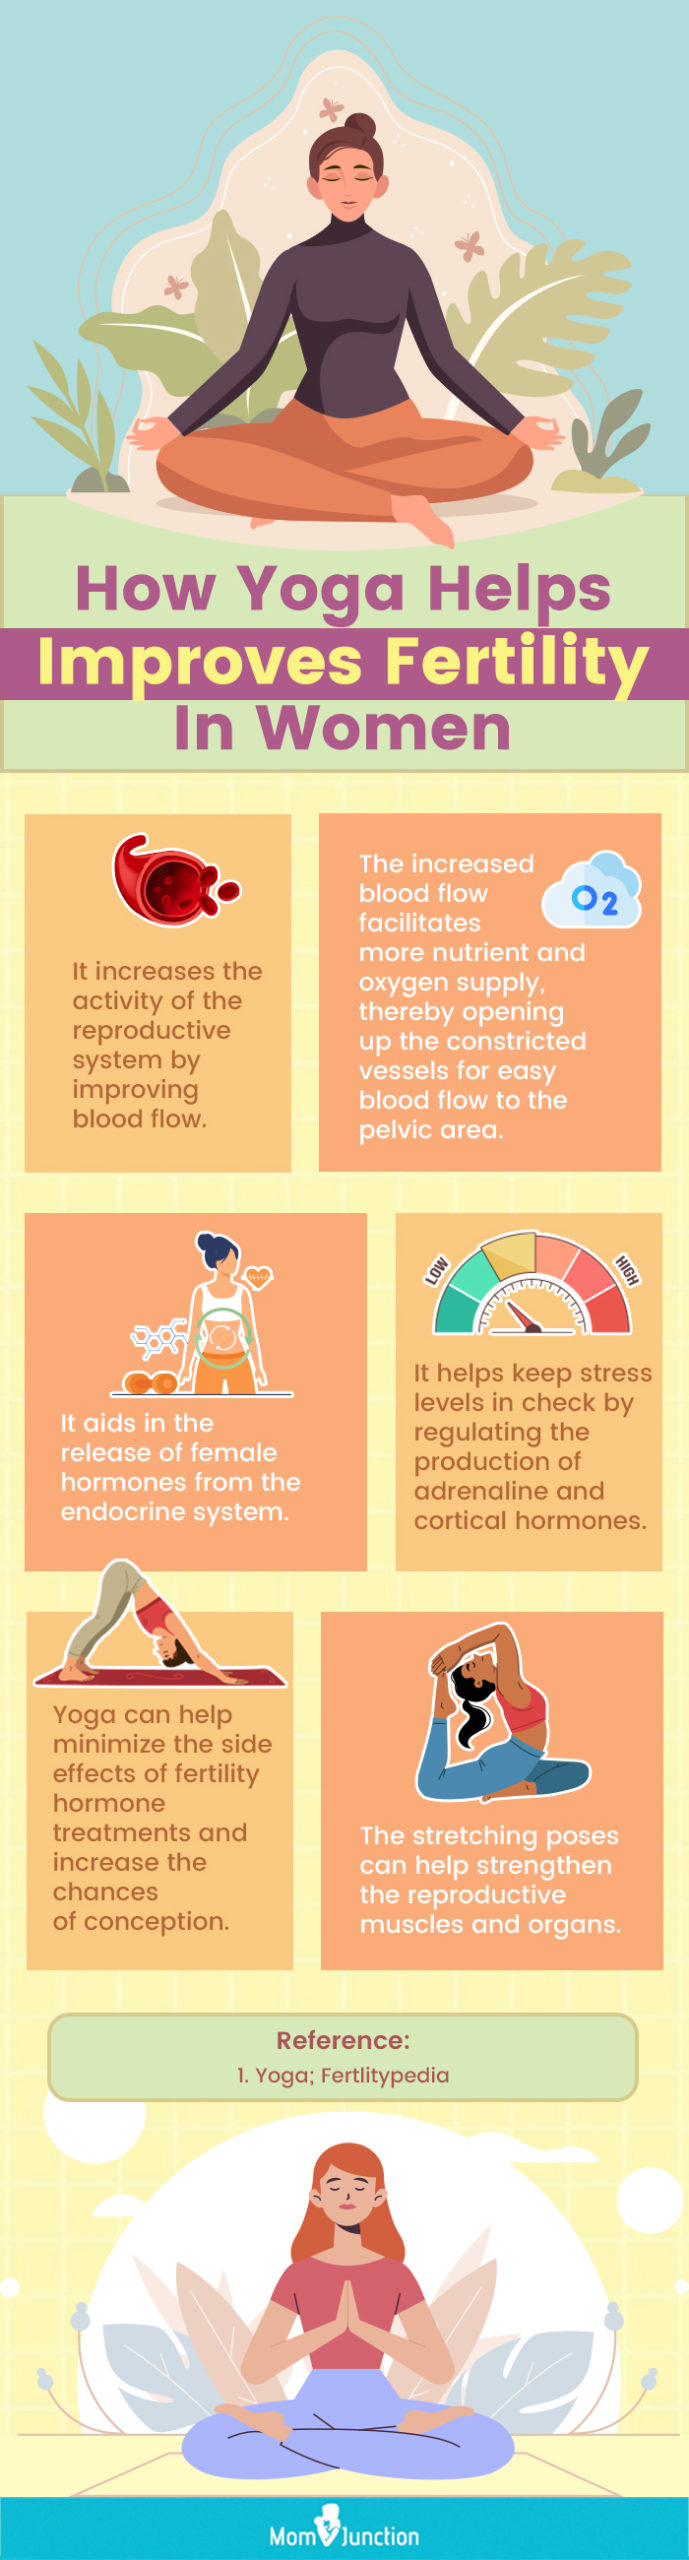 how yoga helps improves fertility in women [infographic]